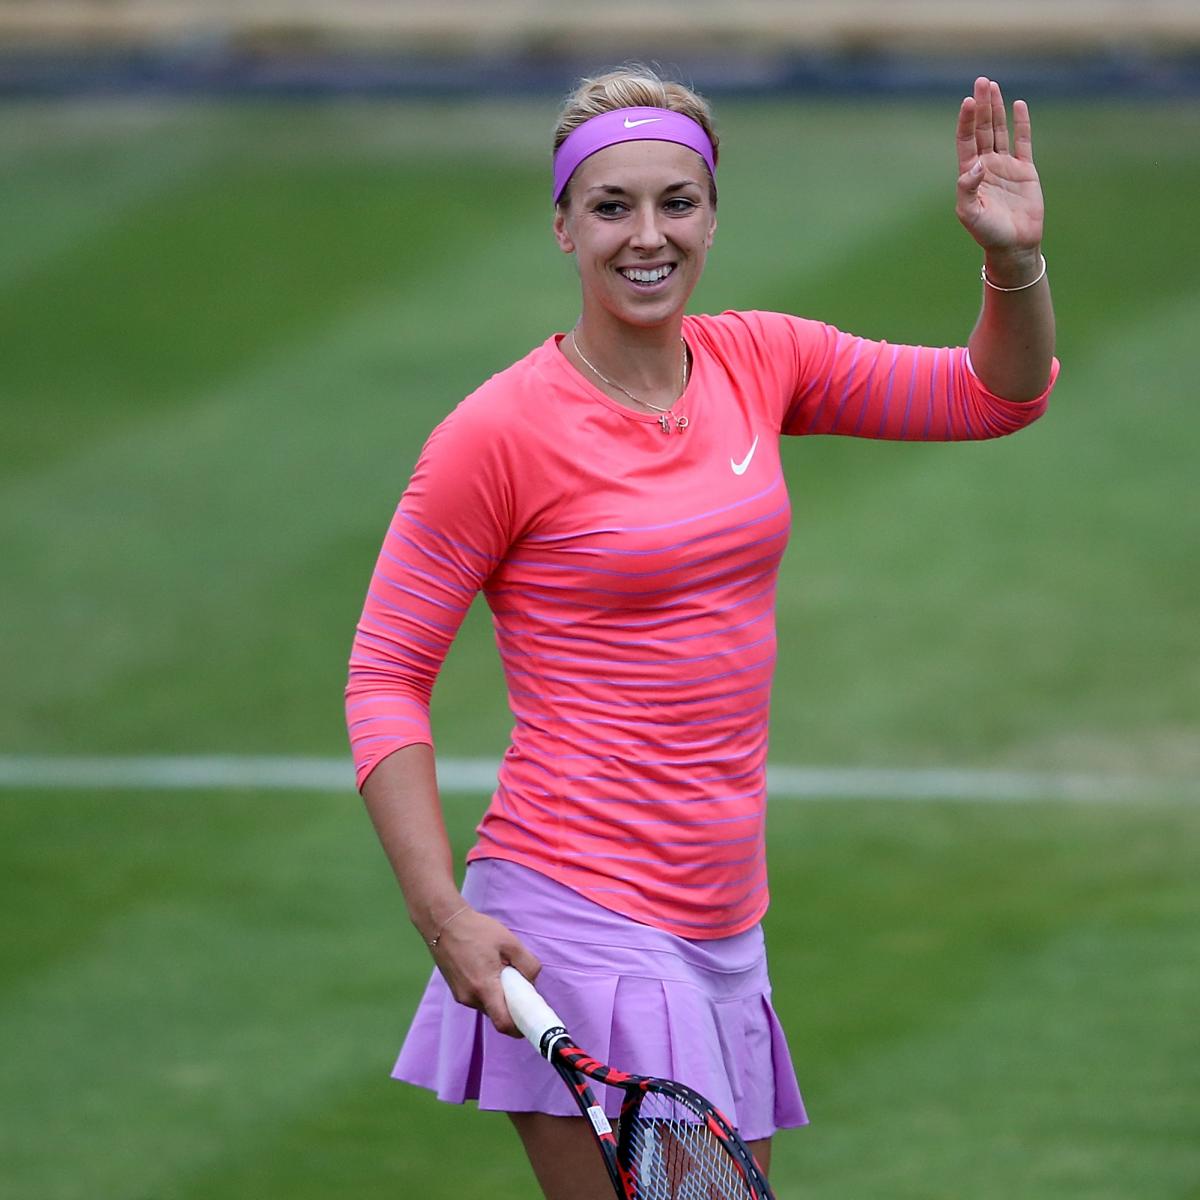 Sabine Lisicki Breaks World Record With 27 Aces At 2015 Aegon Classic Bleacher Report Latest